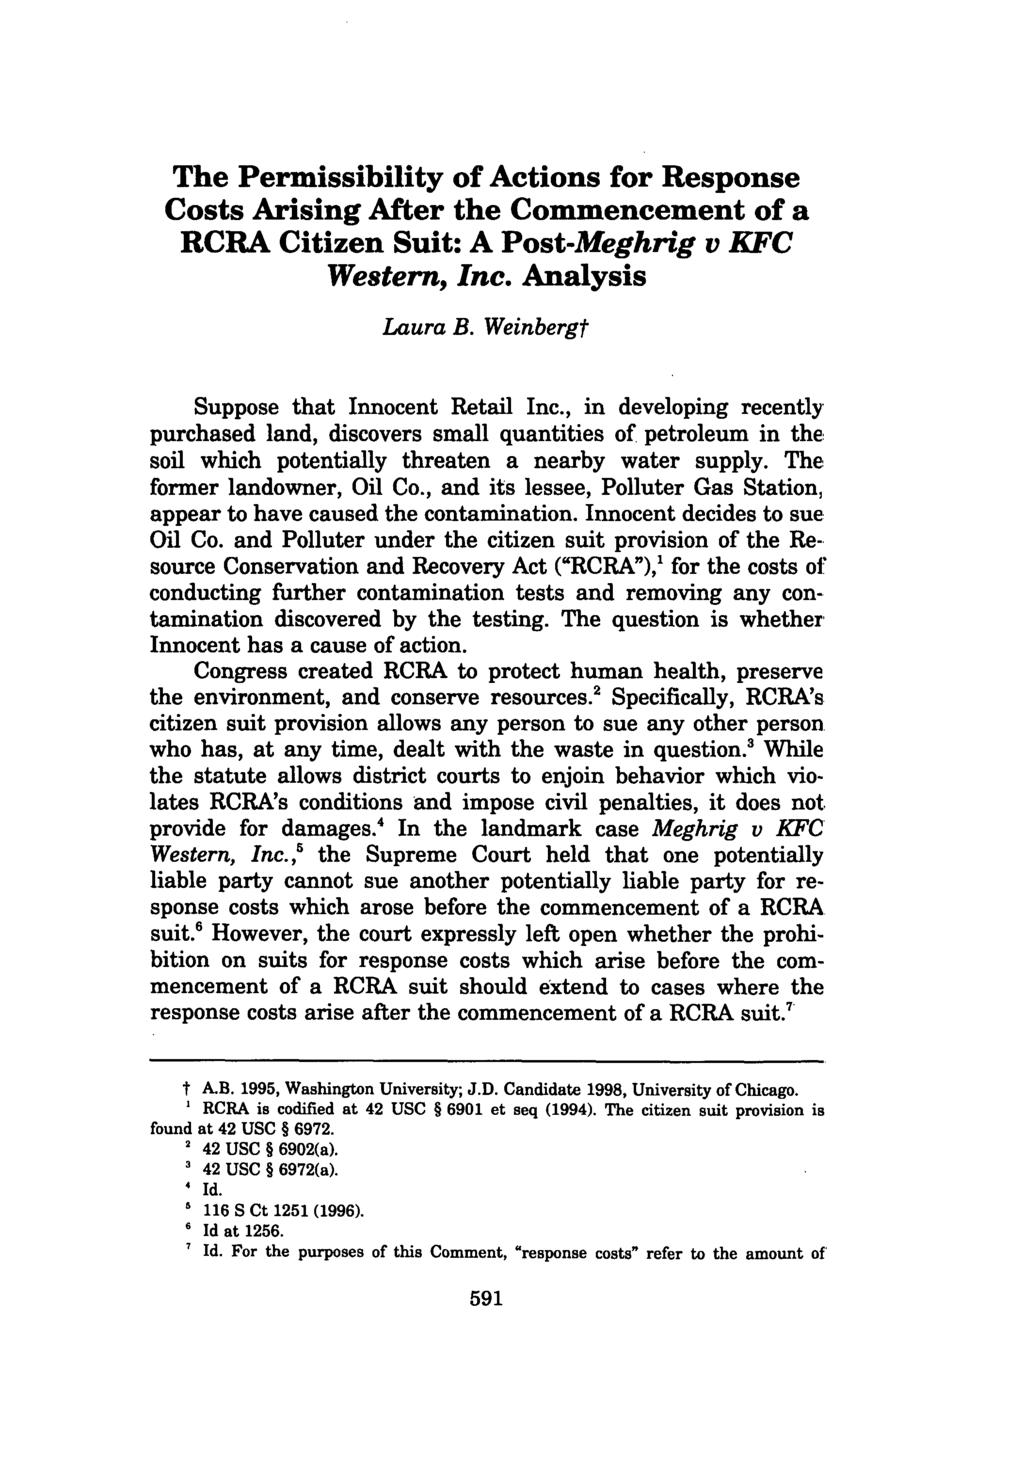 The Permissibility of Actions for Response Costs Arising After the Commencement of a RCRA Citizen Suit: A Post-Meghrig v KFC Western, Inc. Analysis Laura B. Weinbergt Suppose that Innocent Retail Inc.